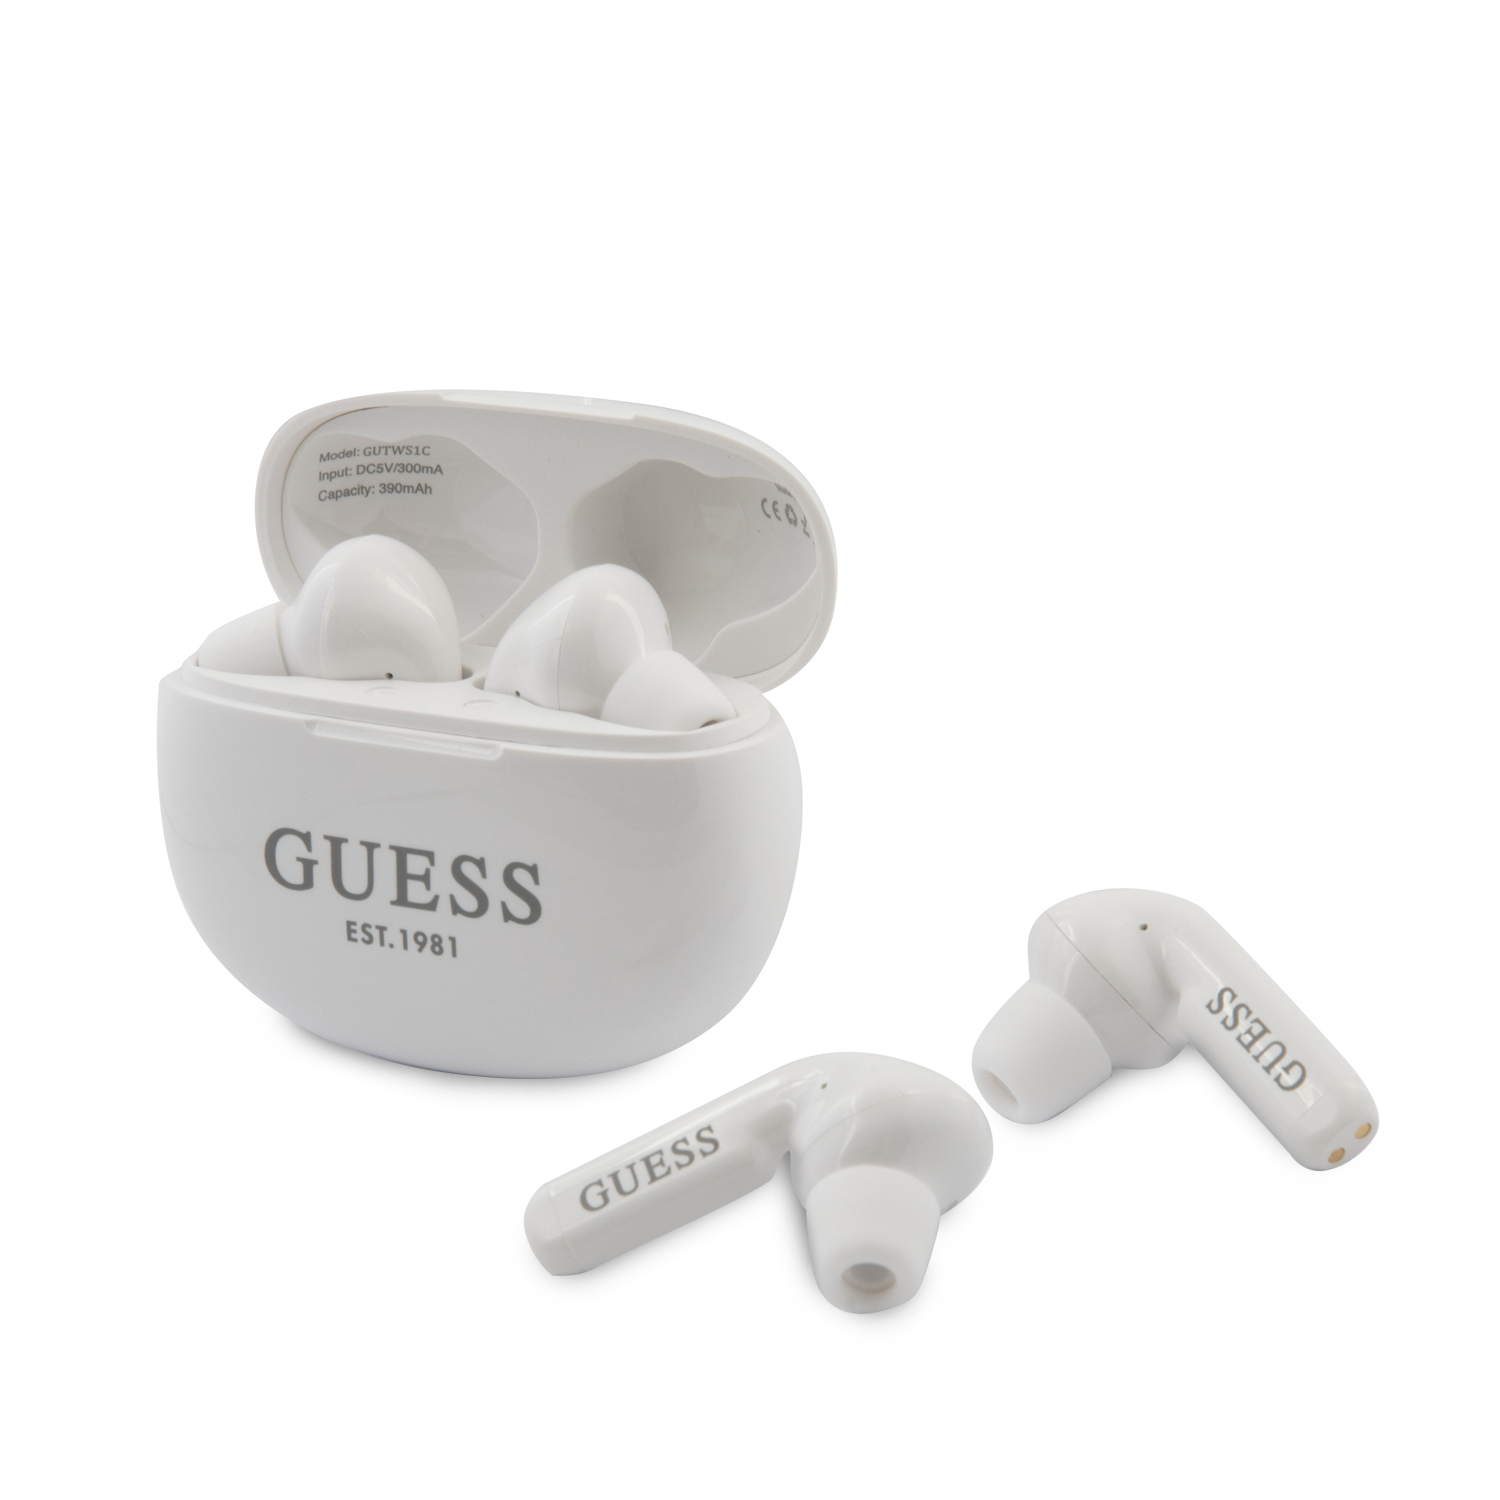 Guess True Wireless GUTWS1CWH Stereo Headset 5.0 4H white